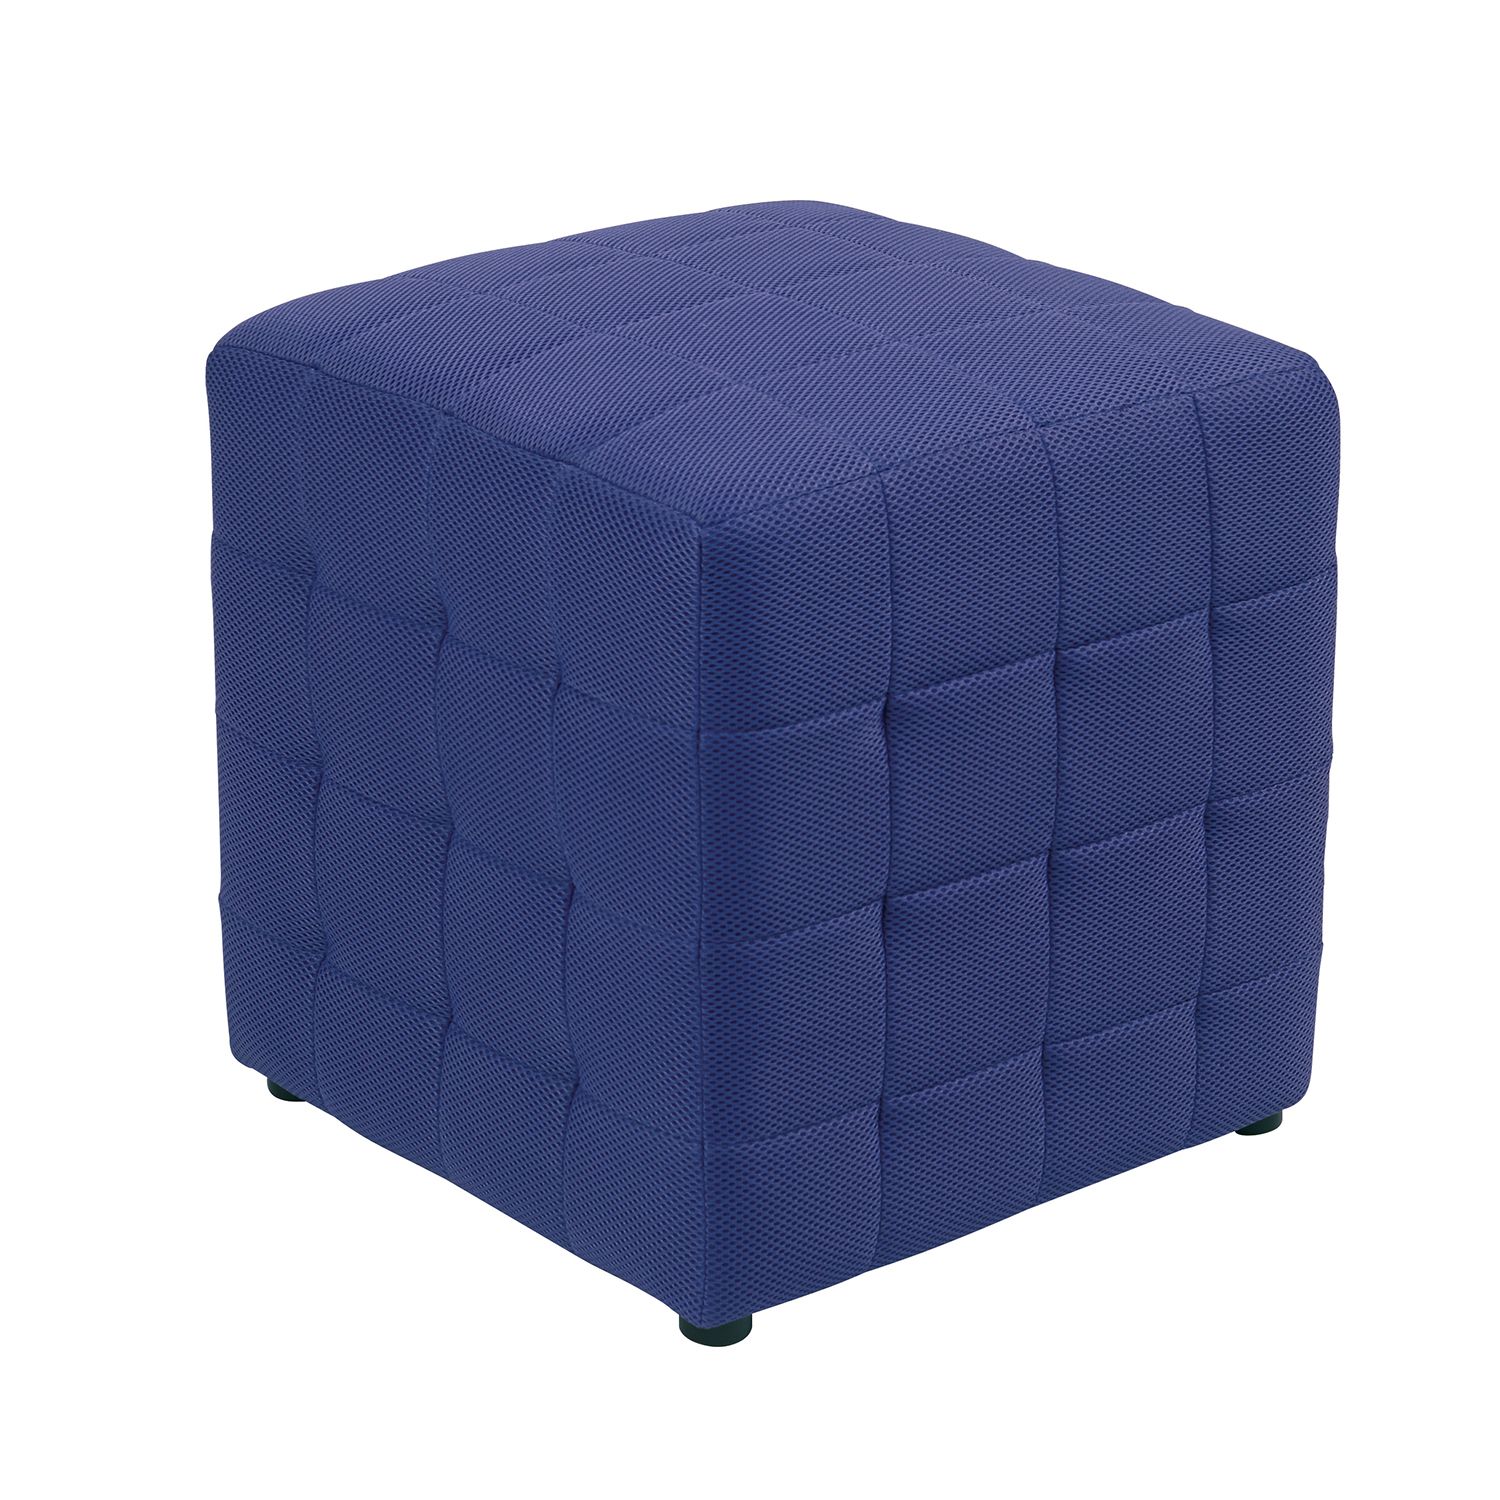 15" Cube Ottoman – Pier1 Intended For Twill Square Cube Ottomans (View 2 of 20)